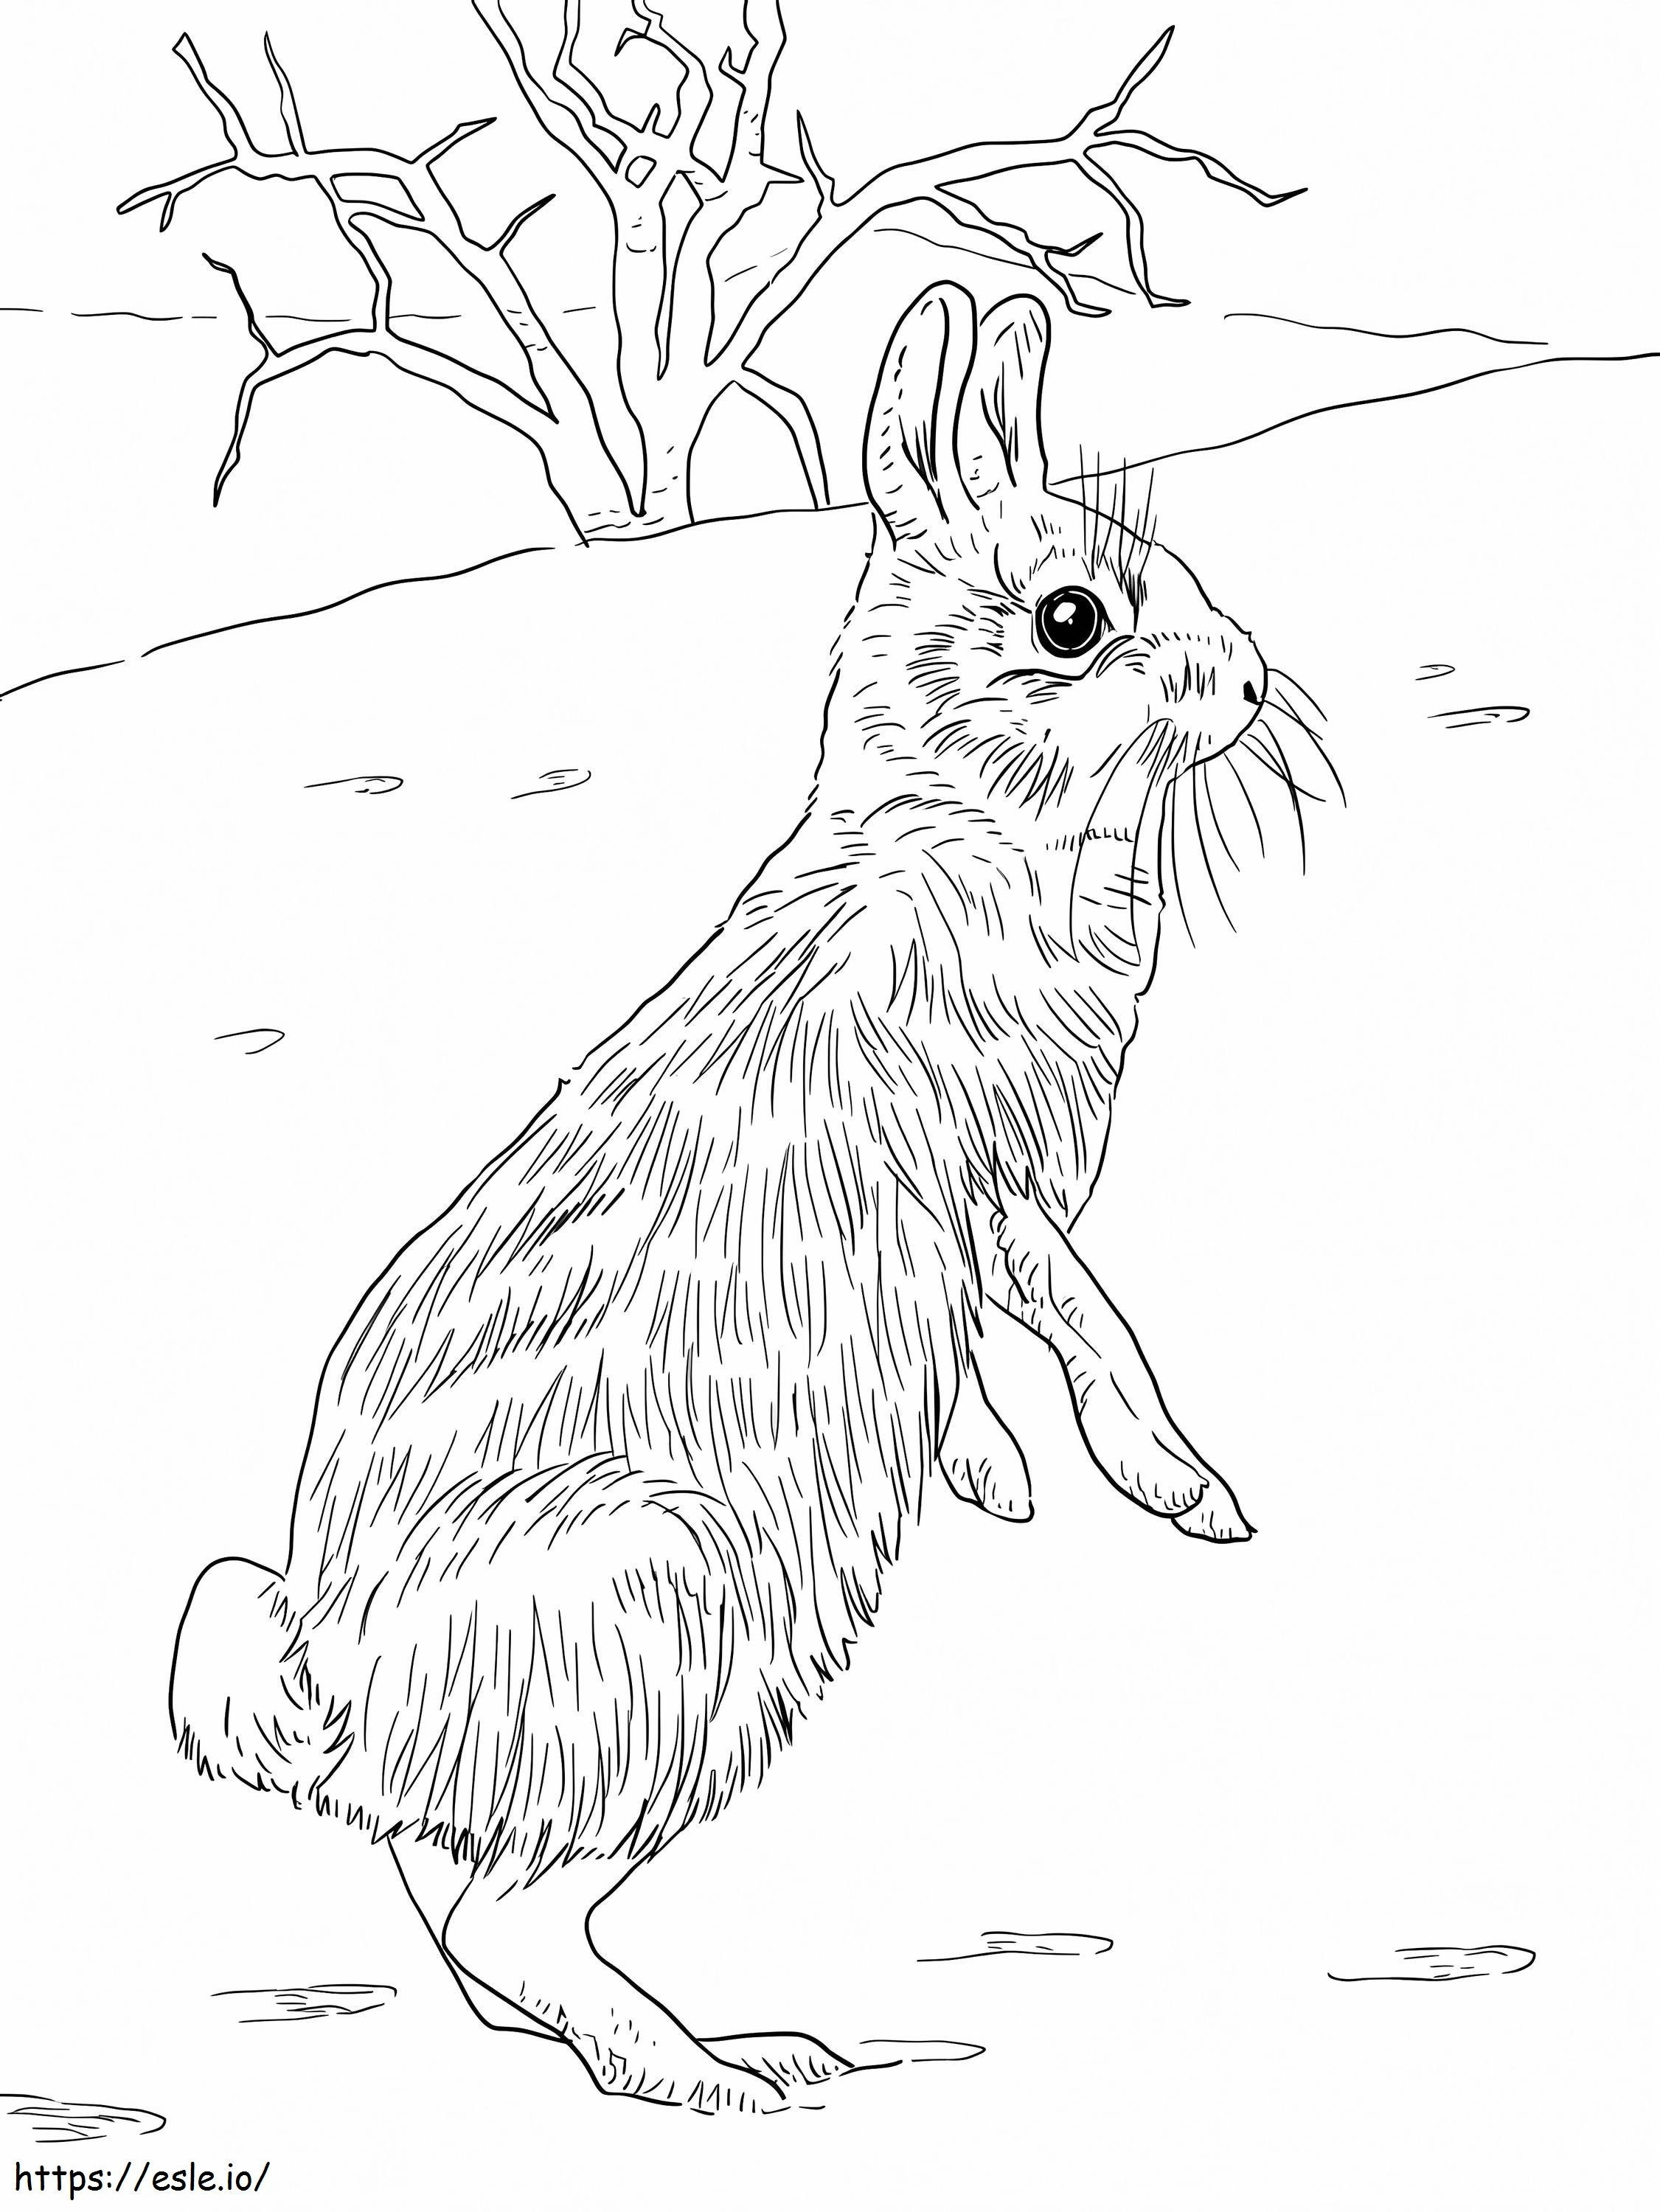 Rabbit On Its Hind Legs coloring page